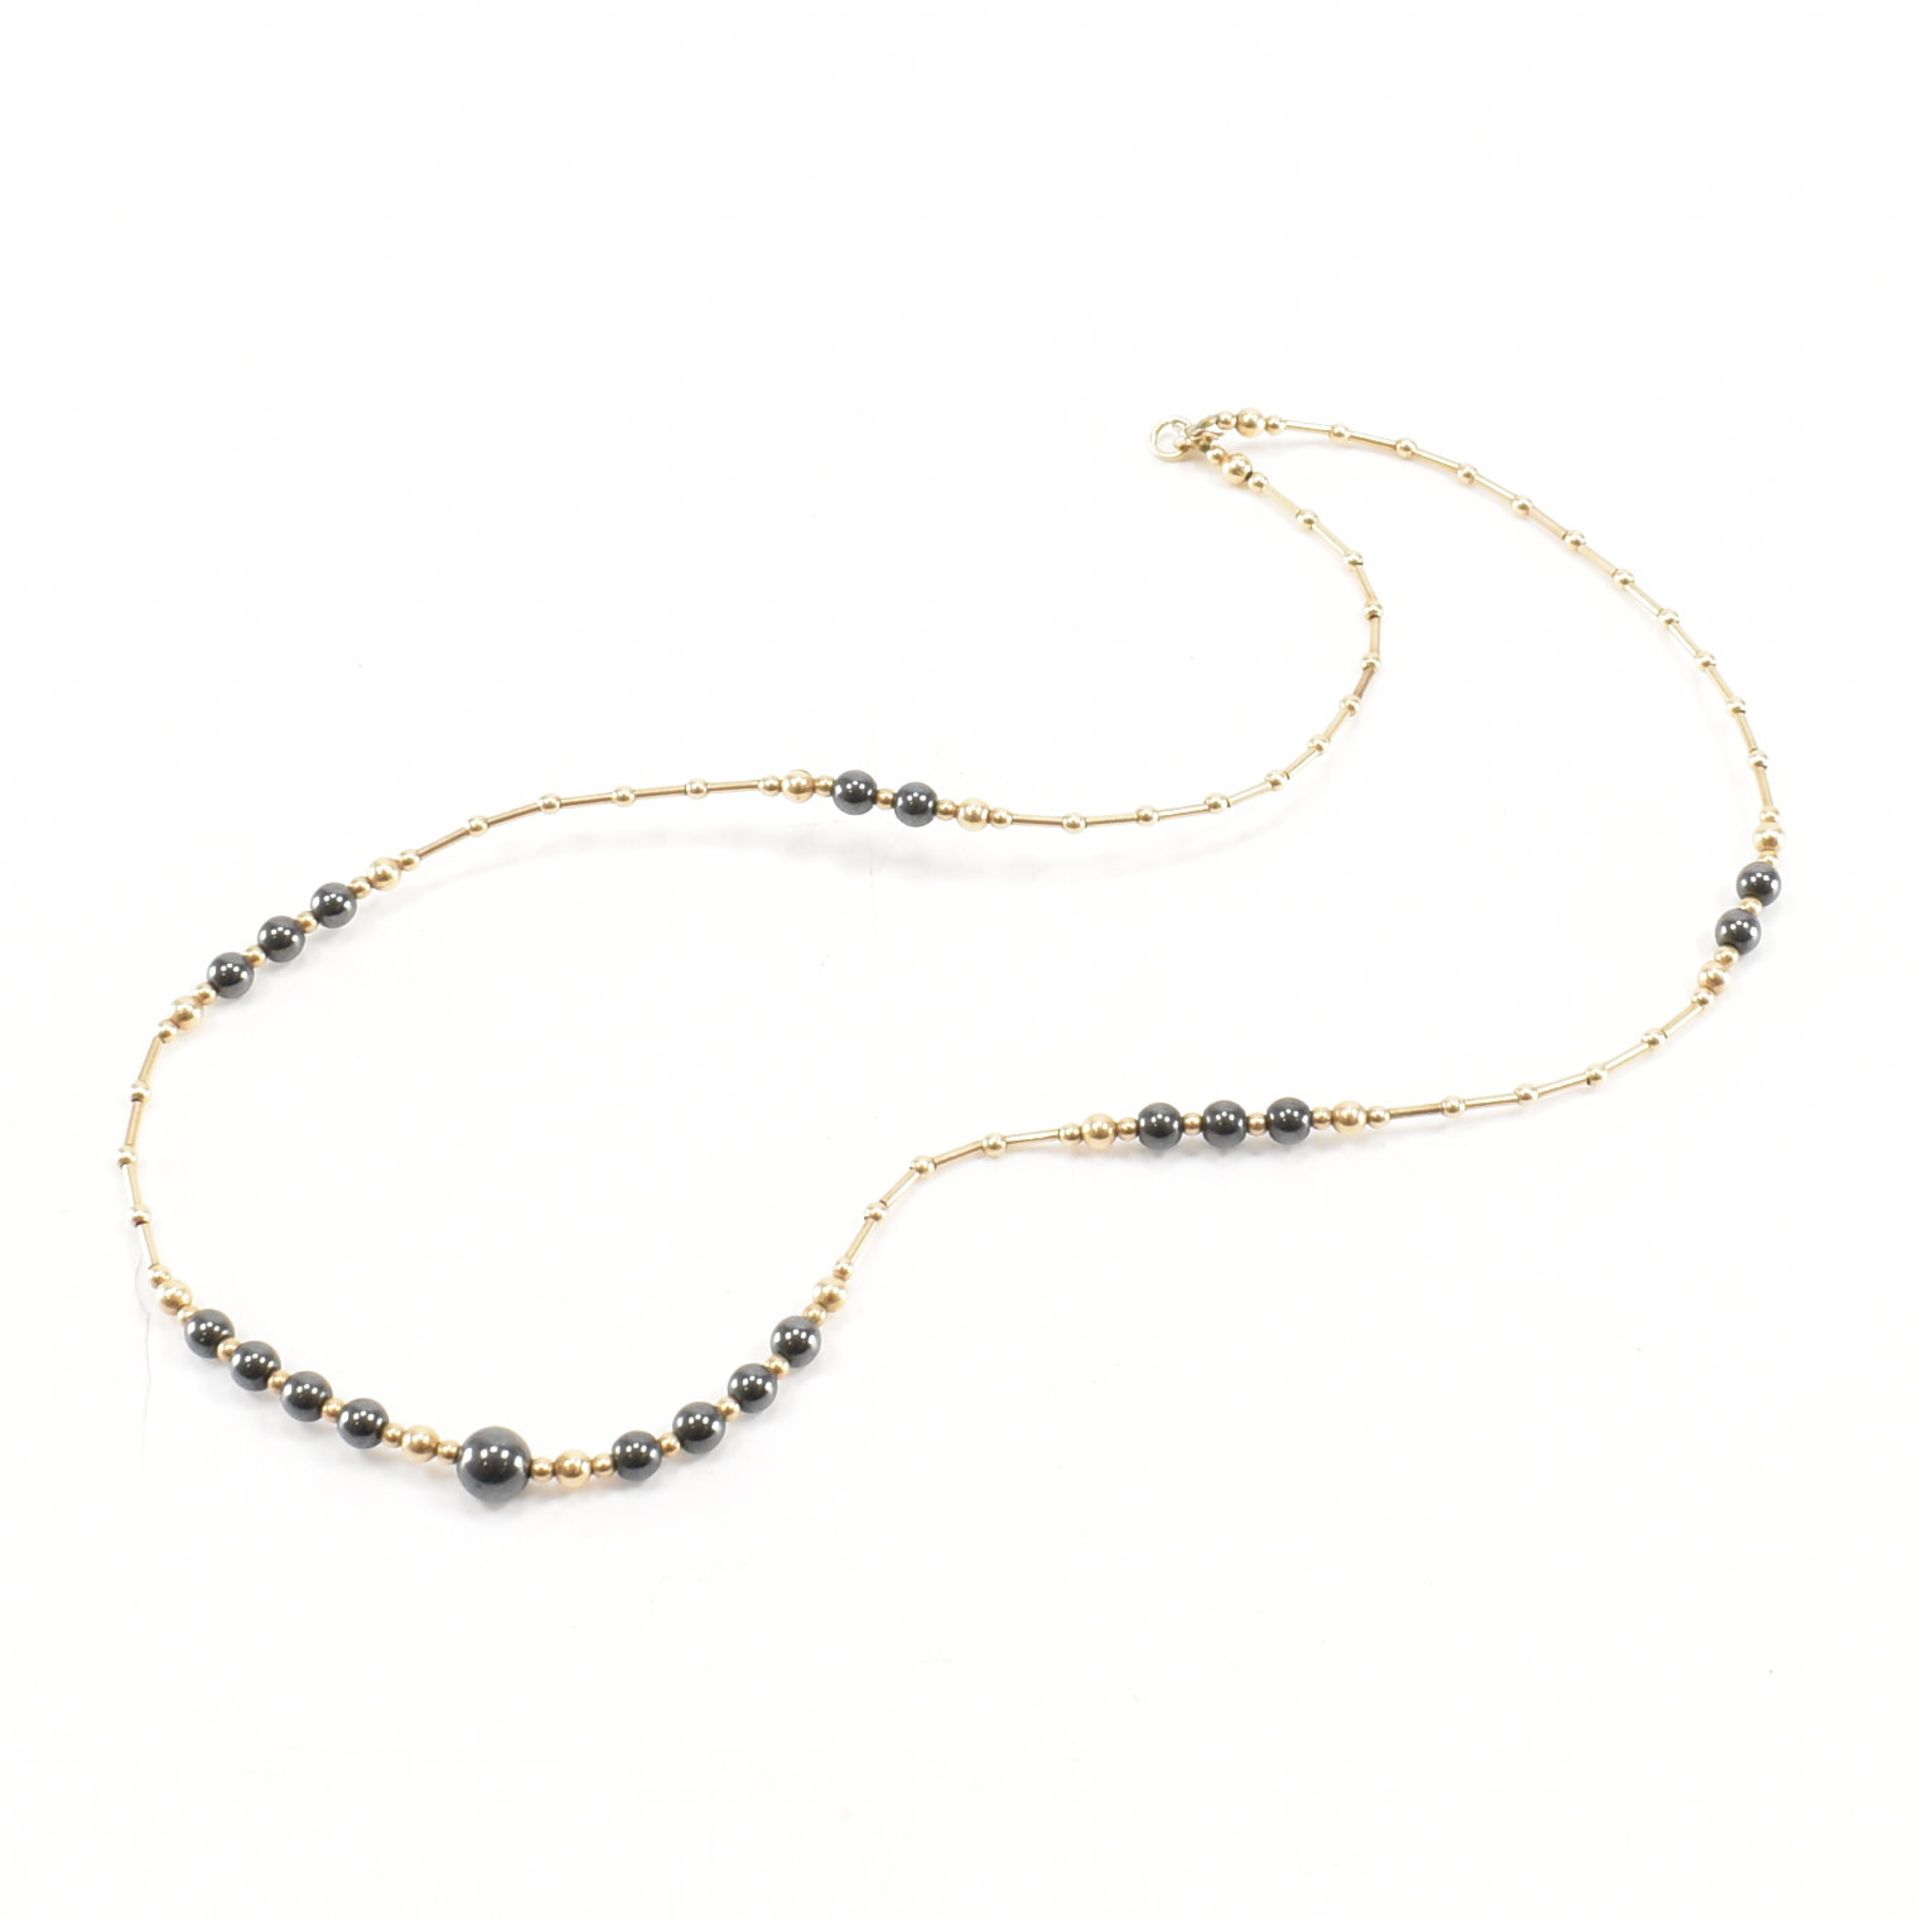 VINTAGE 14CT GOLD & HEMATITE BEADED NECKLACE - Image 2 of 4